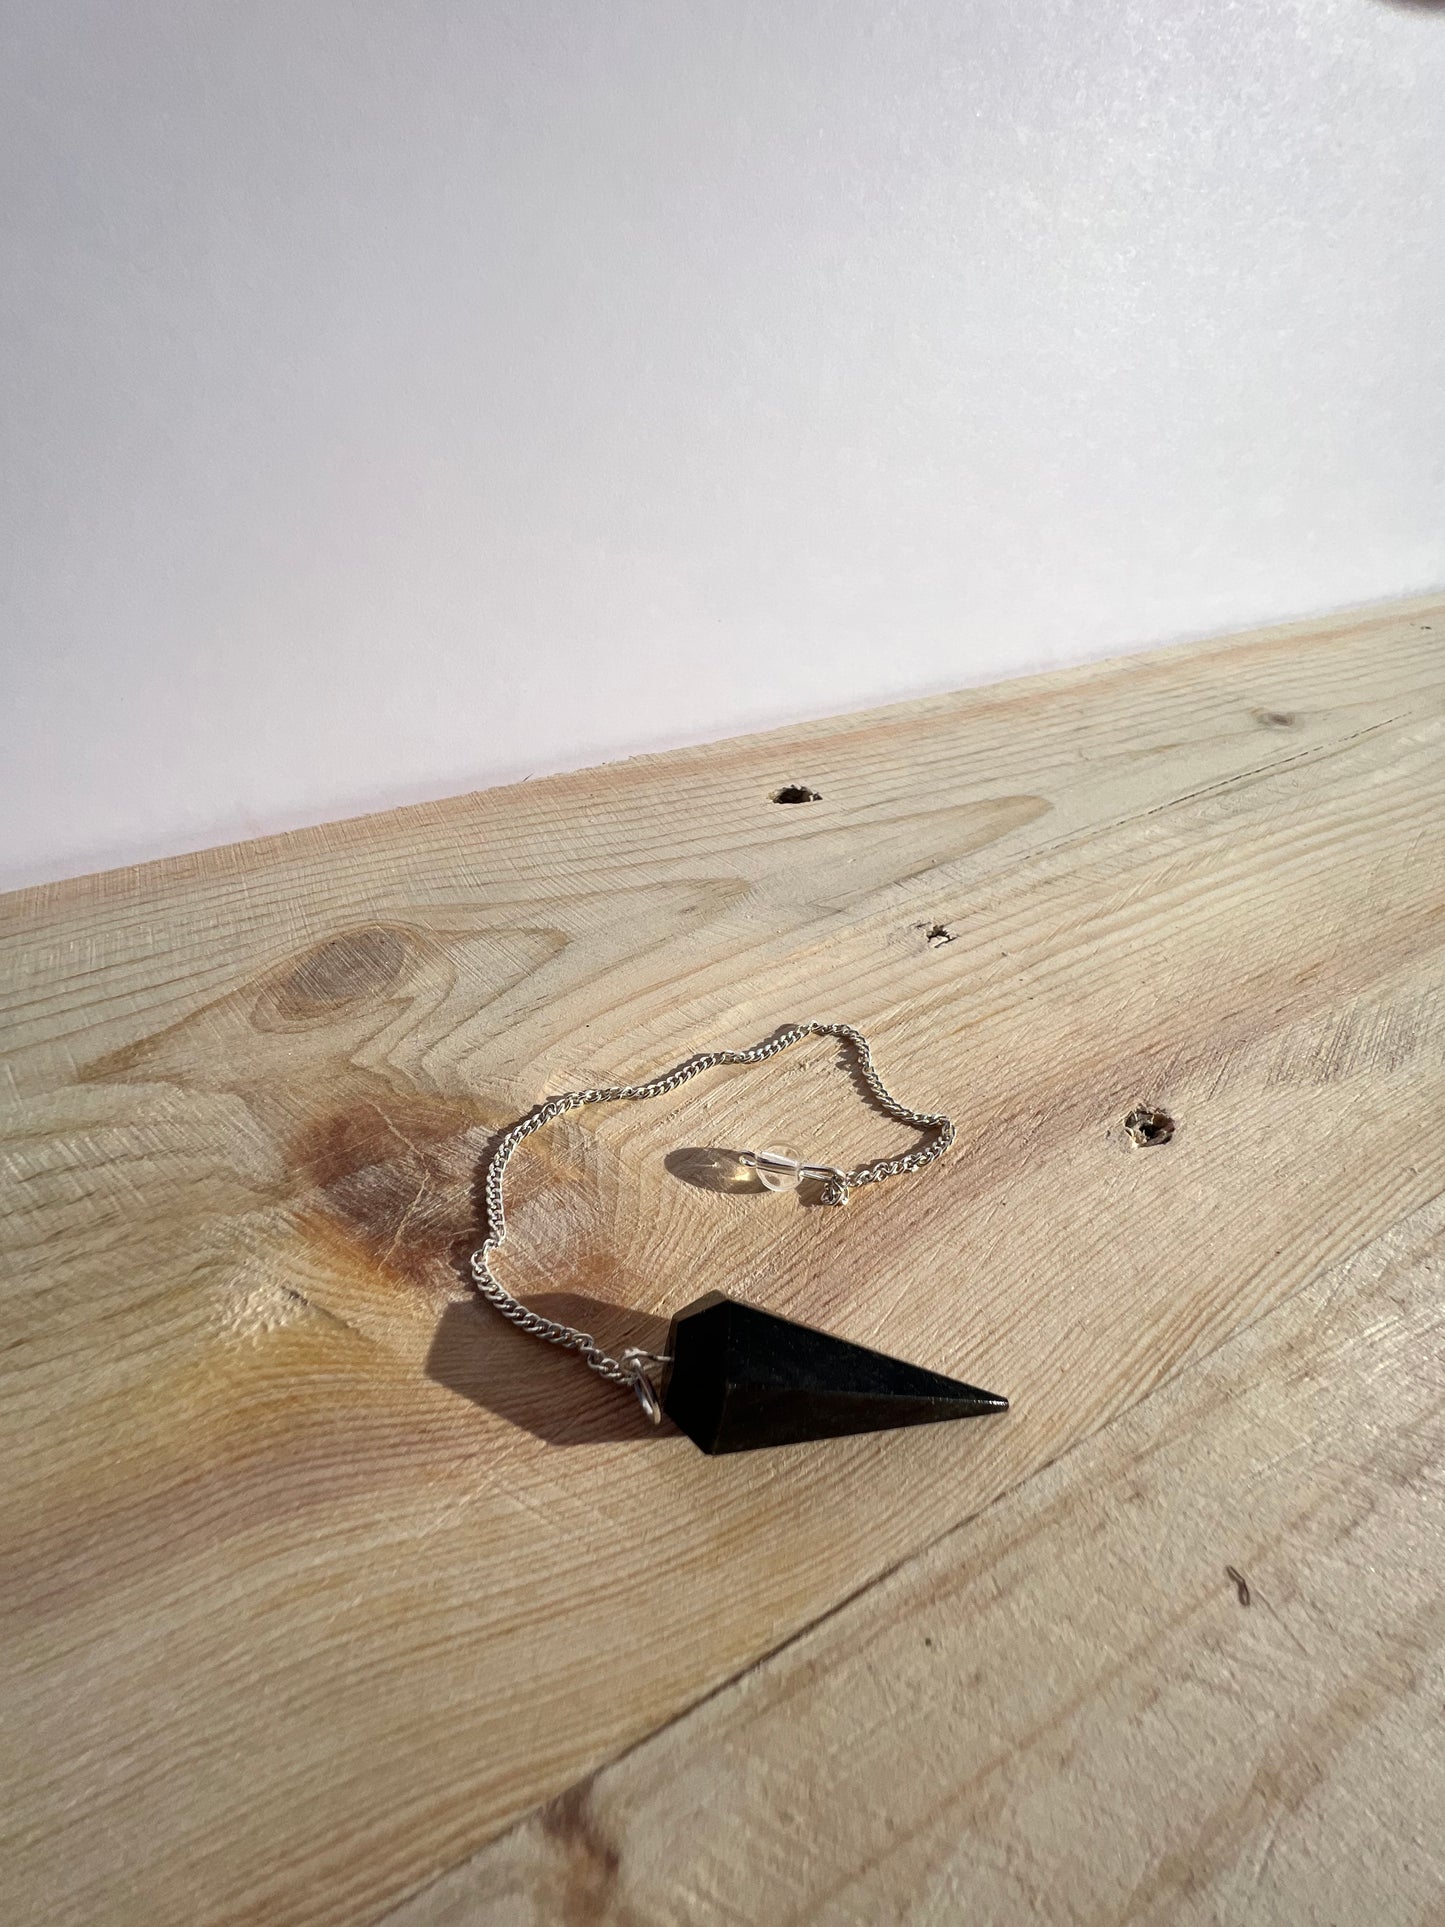 A zoomed out view of a black obsidian pendulum sitting on a pine board with a white backdrop.